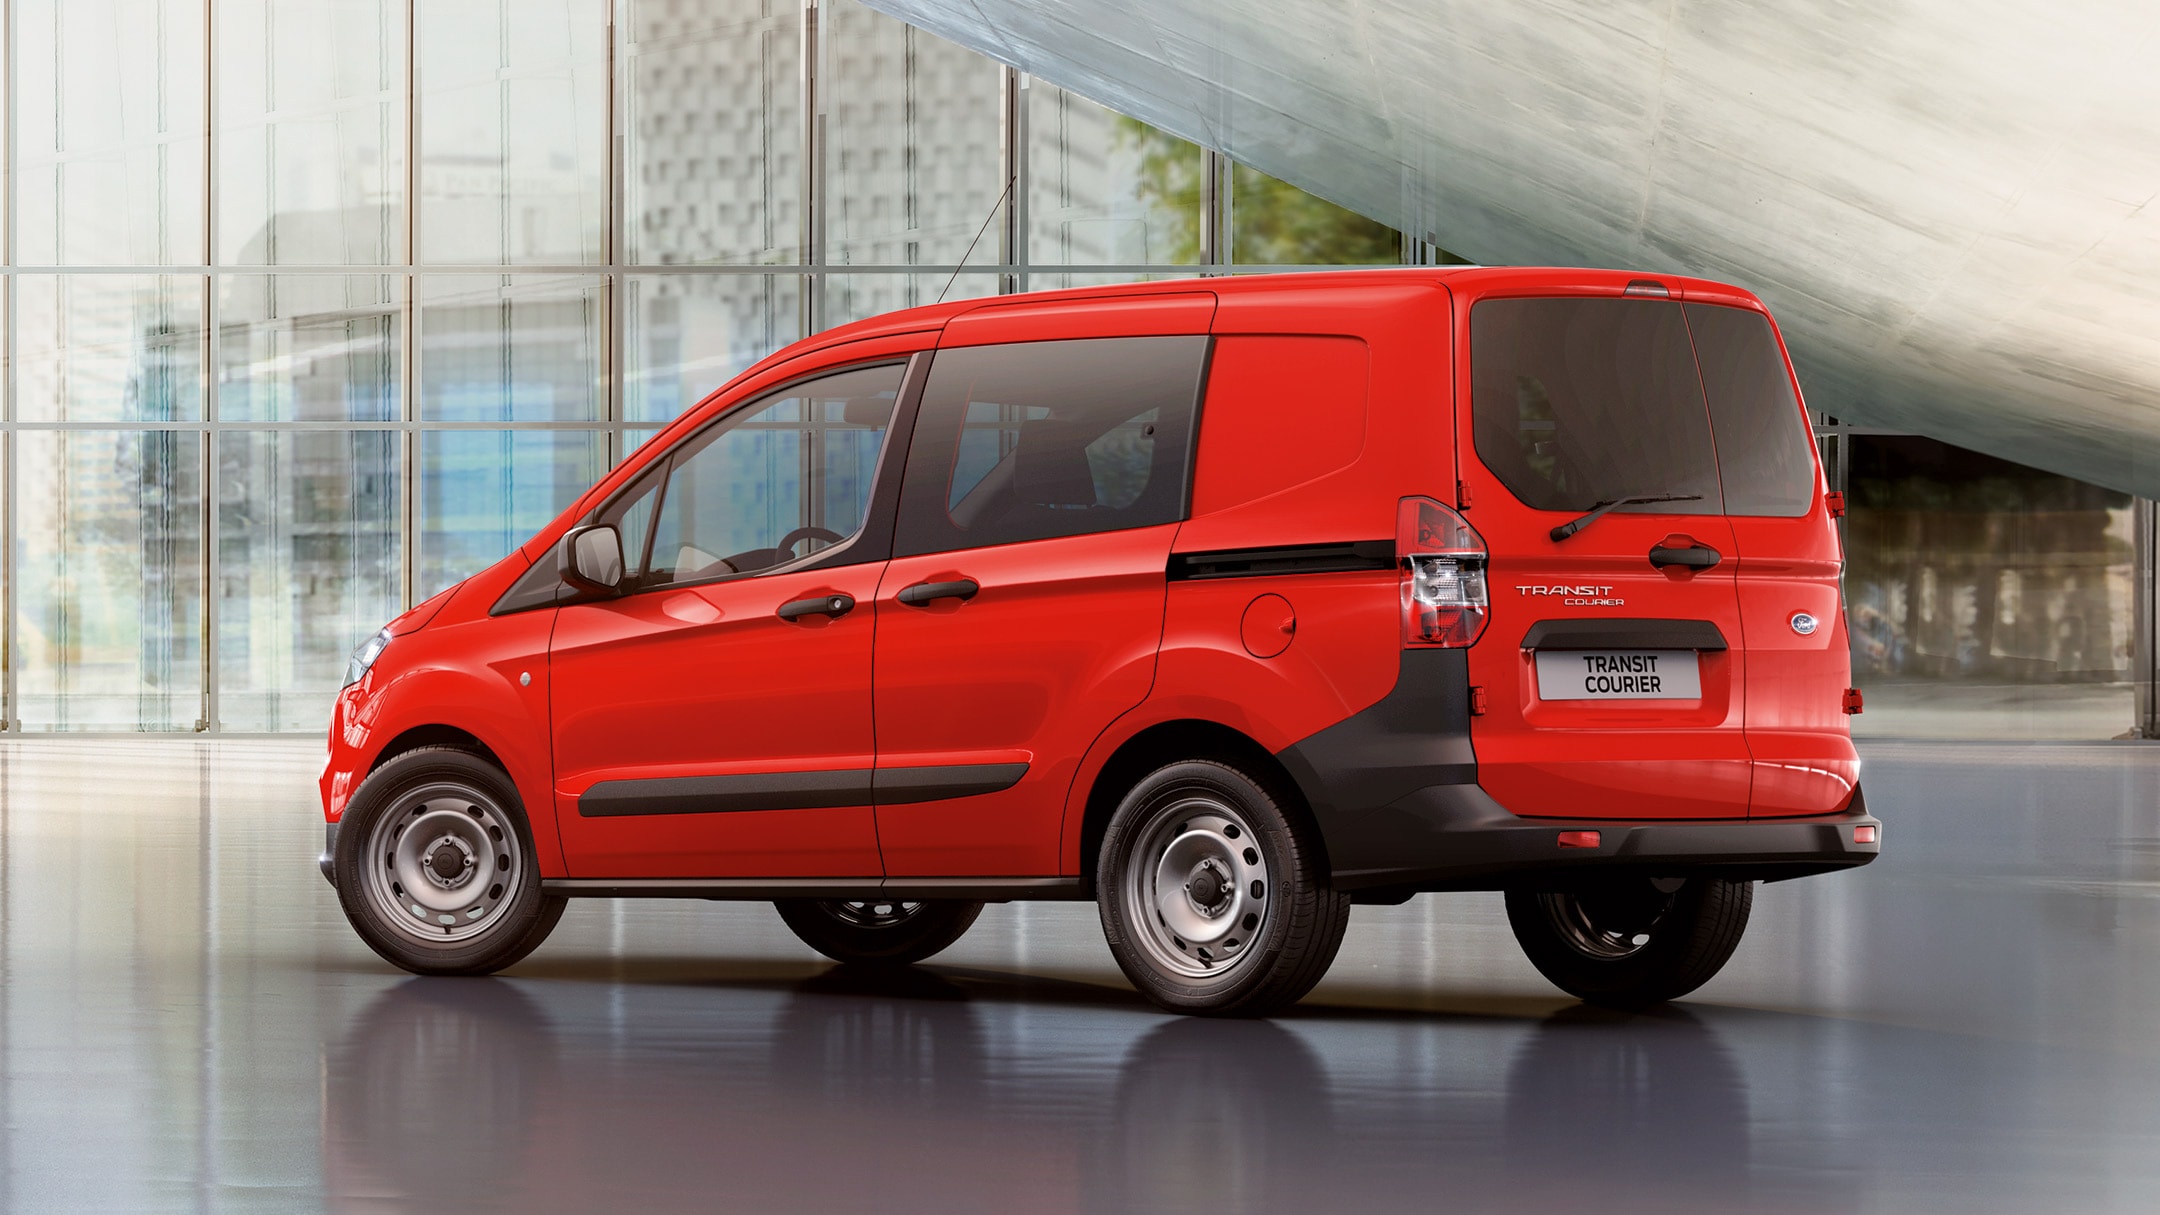 Red Ford Transit Courier standing in front of glass building in side view